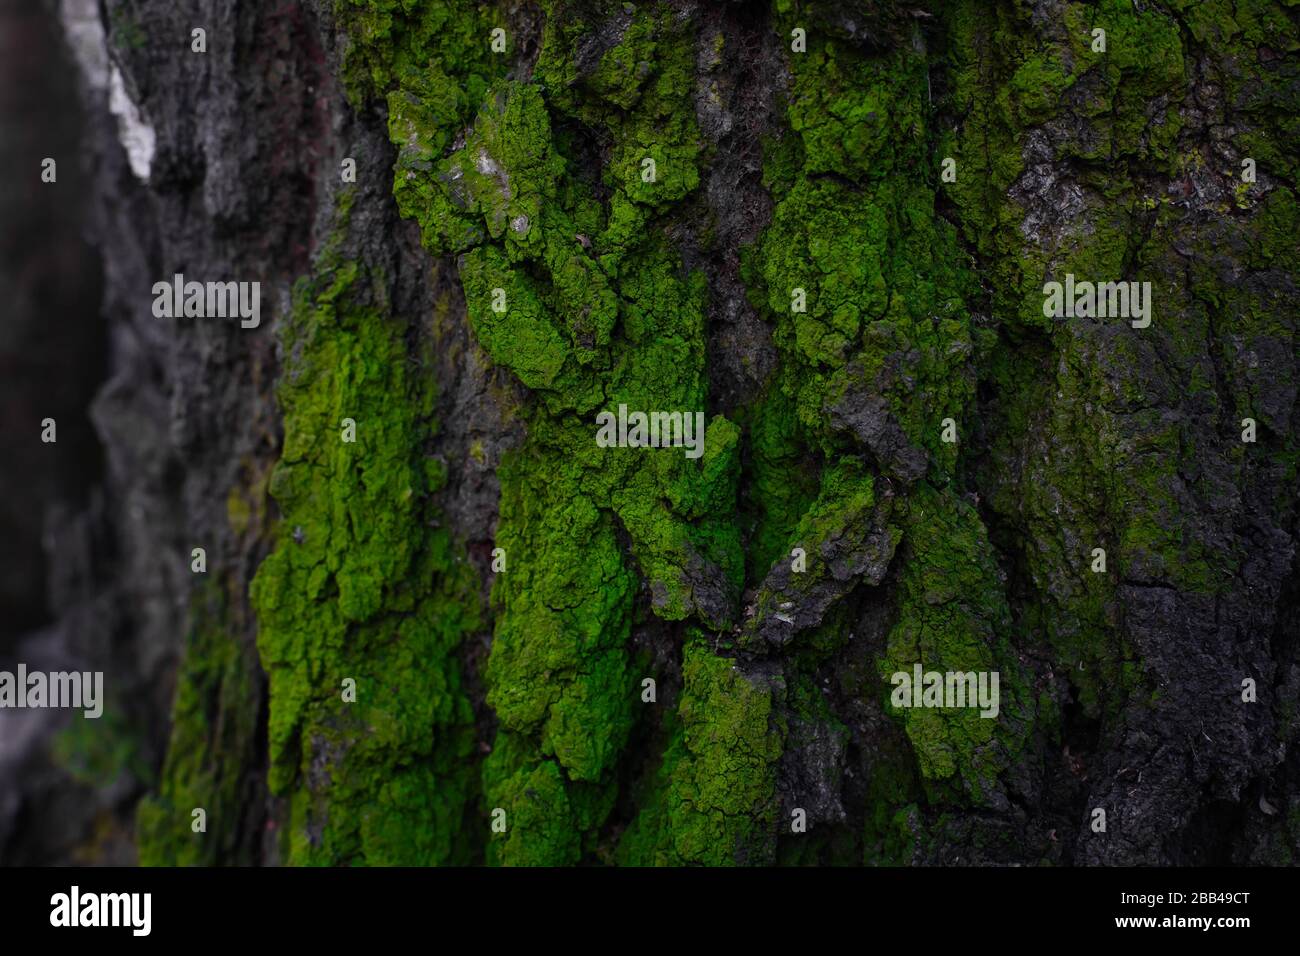 Bark covered with green moss abstract texture. Natural background. Forest tree close up Stock Photo